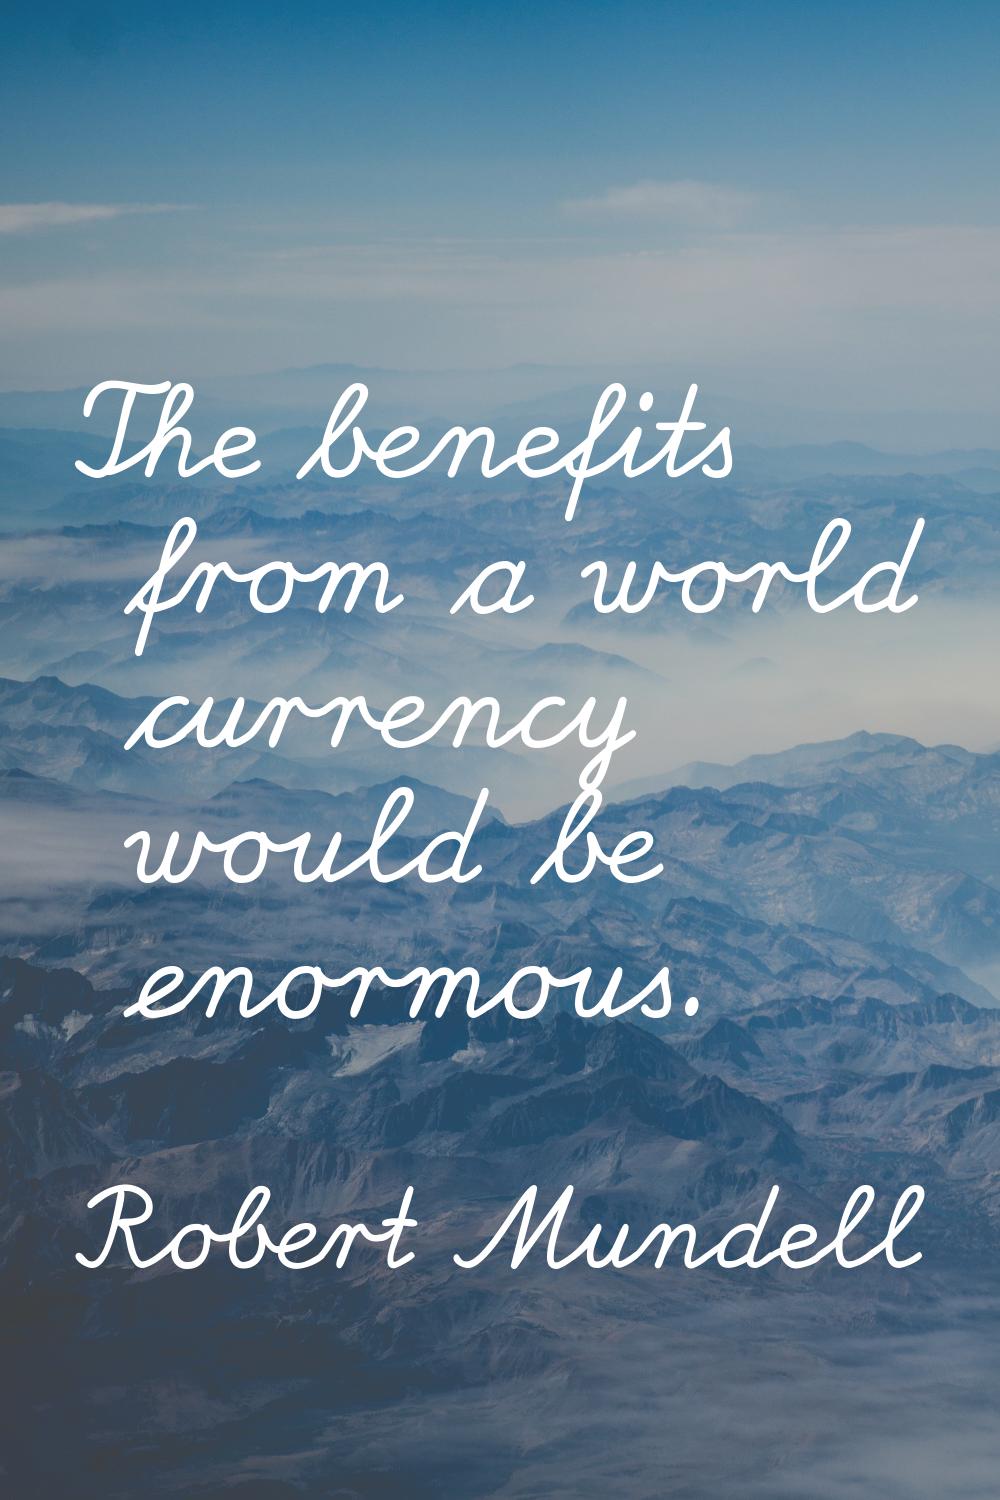 The benefits from a world currency would be enormous.